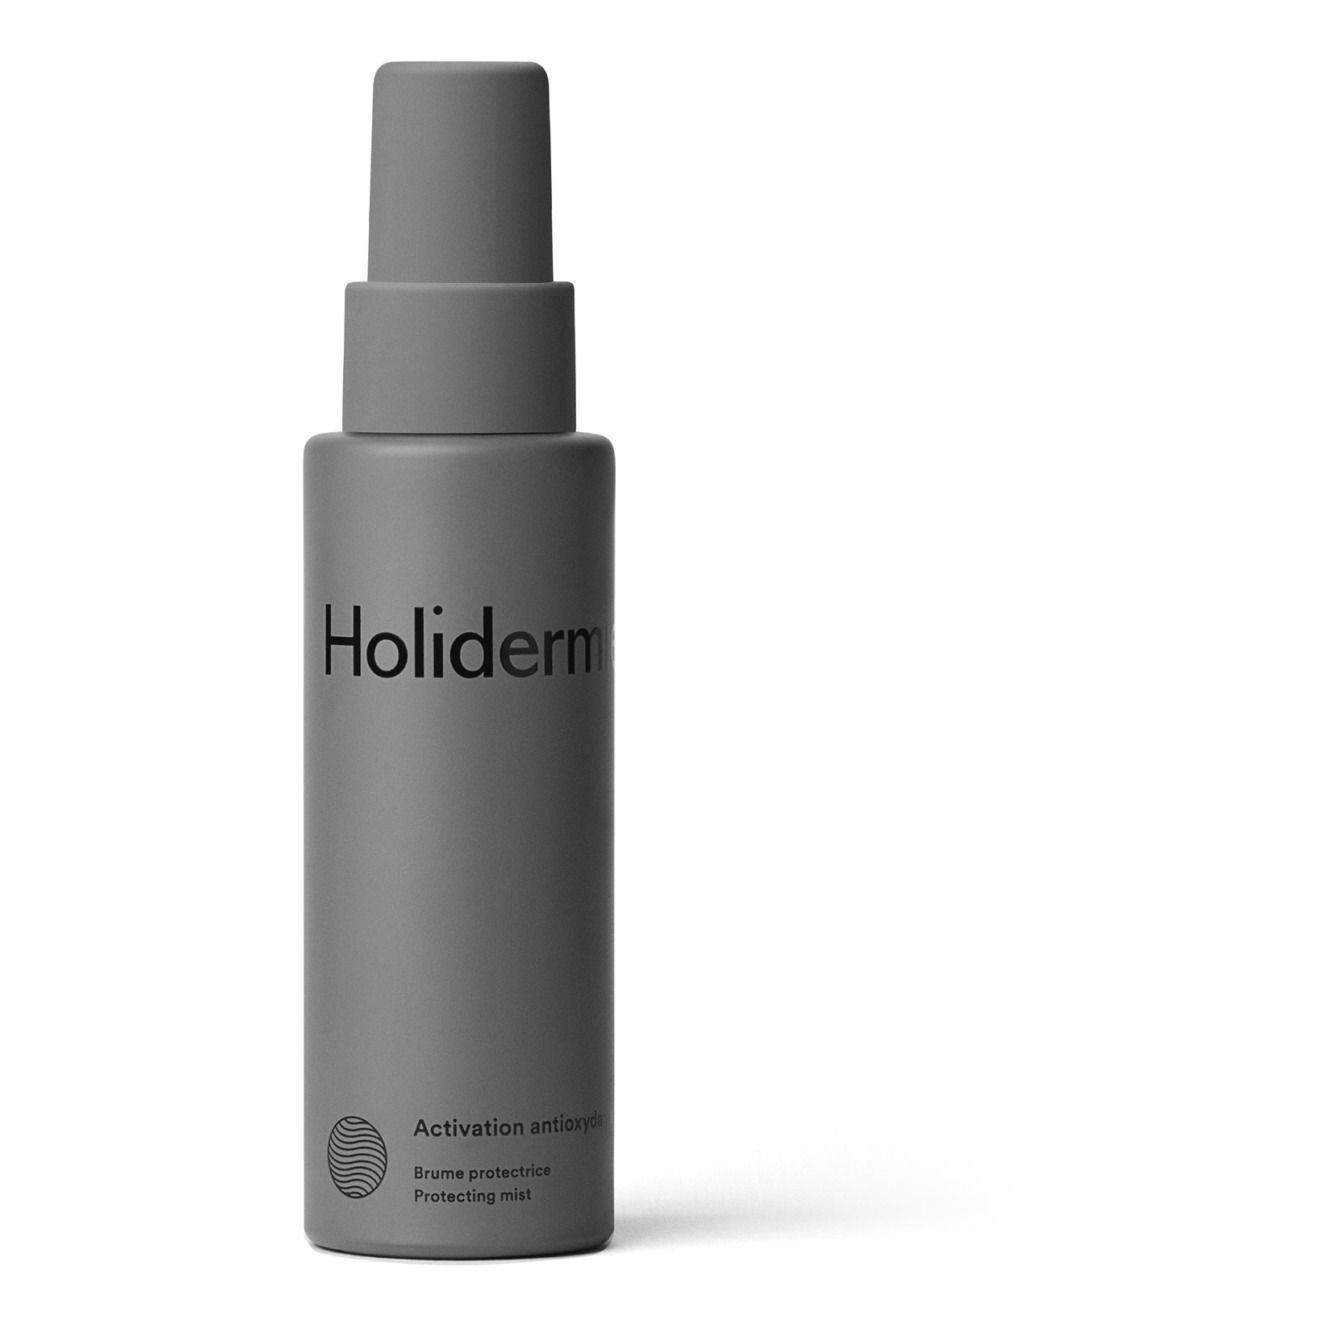 Holidermie - Brume protectrice Activation antioxydante - 30 ml - Blanc